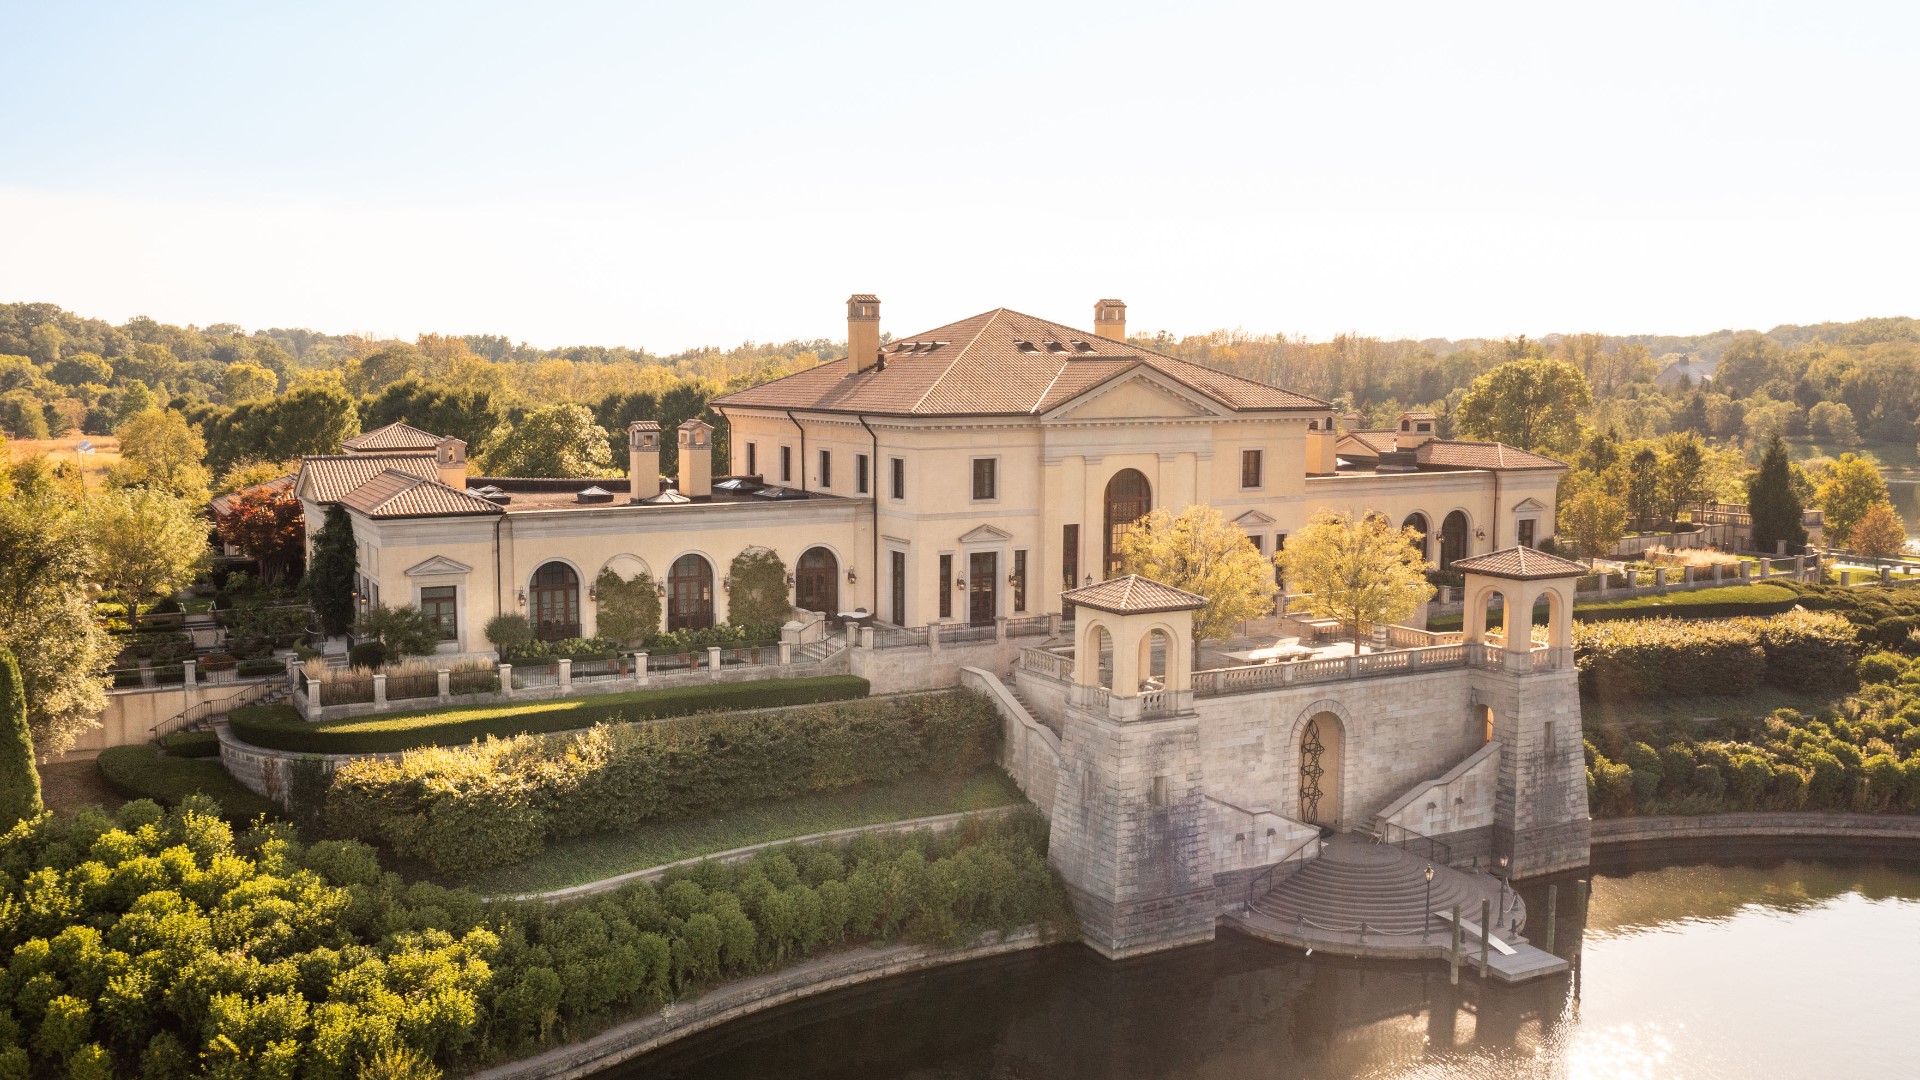 While the estate was listed for $14 million, the purchasing price is not being disclosed.